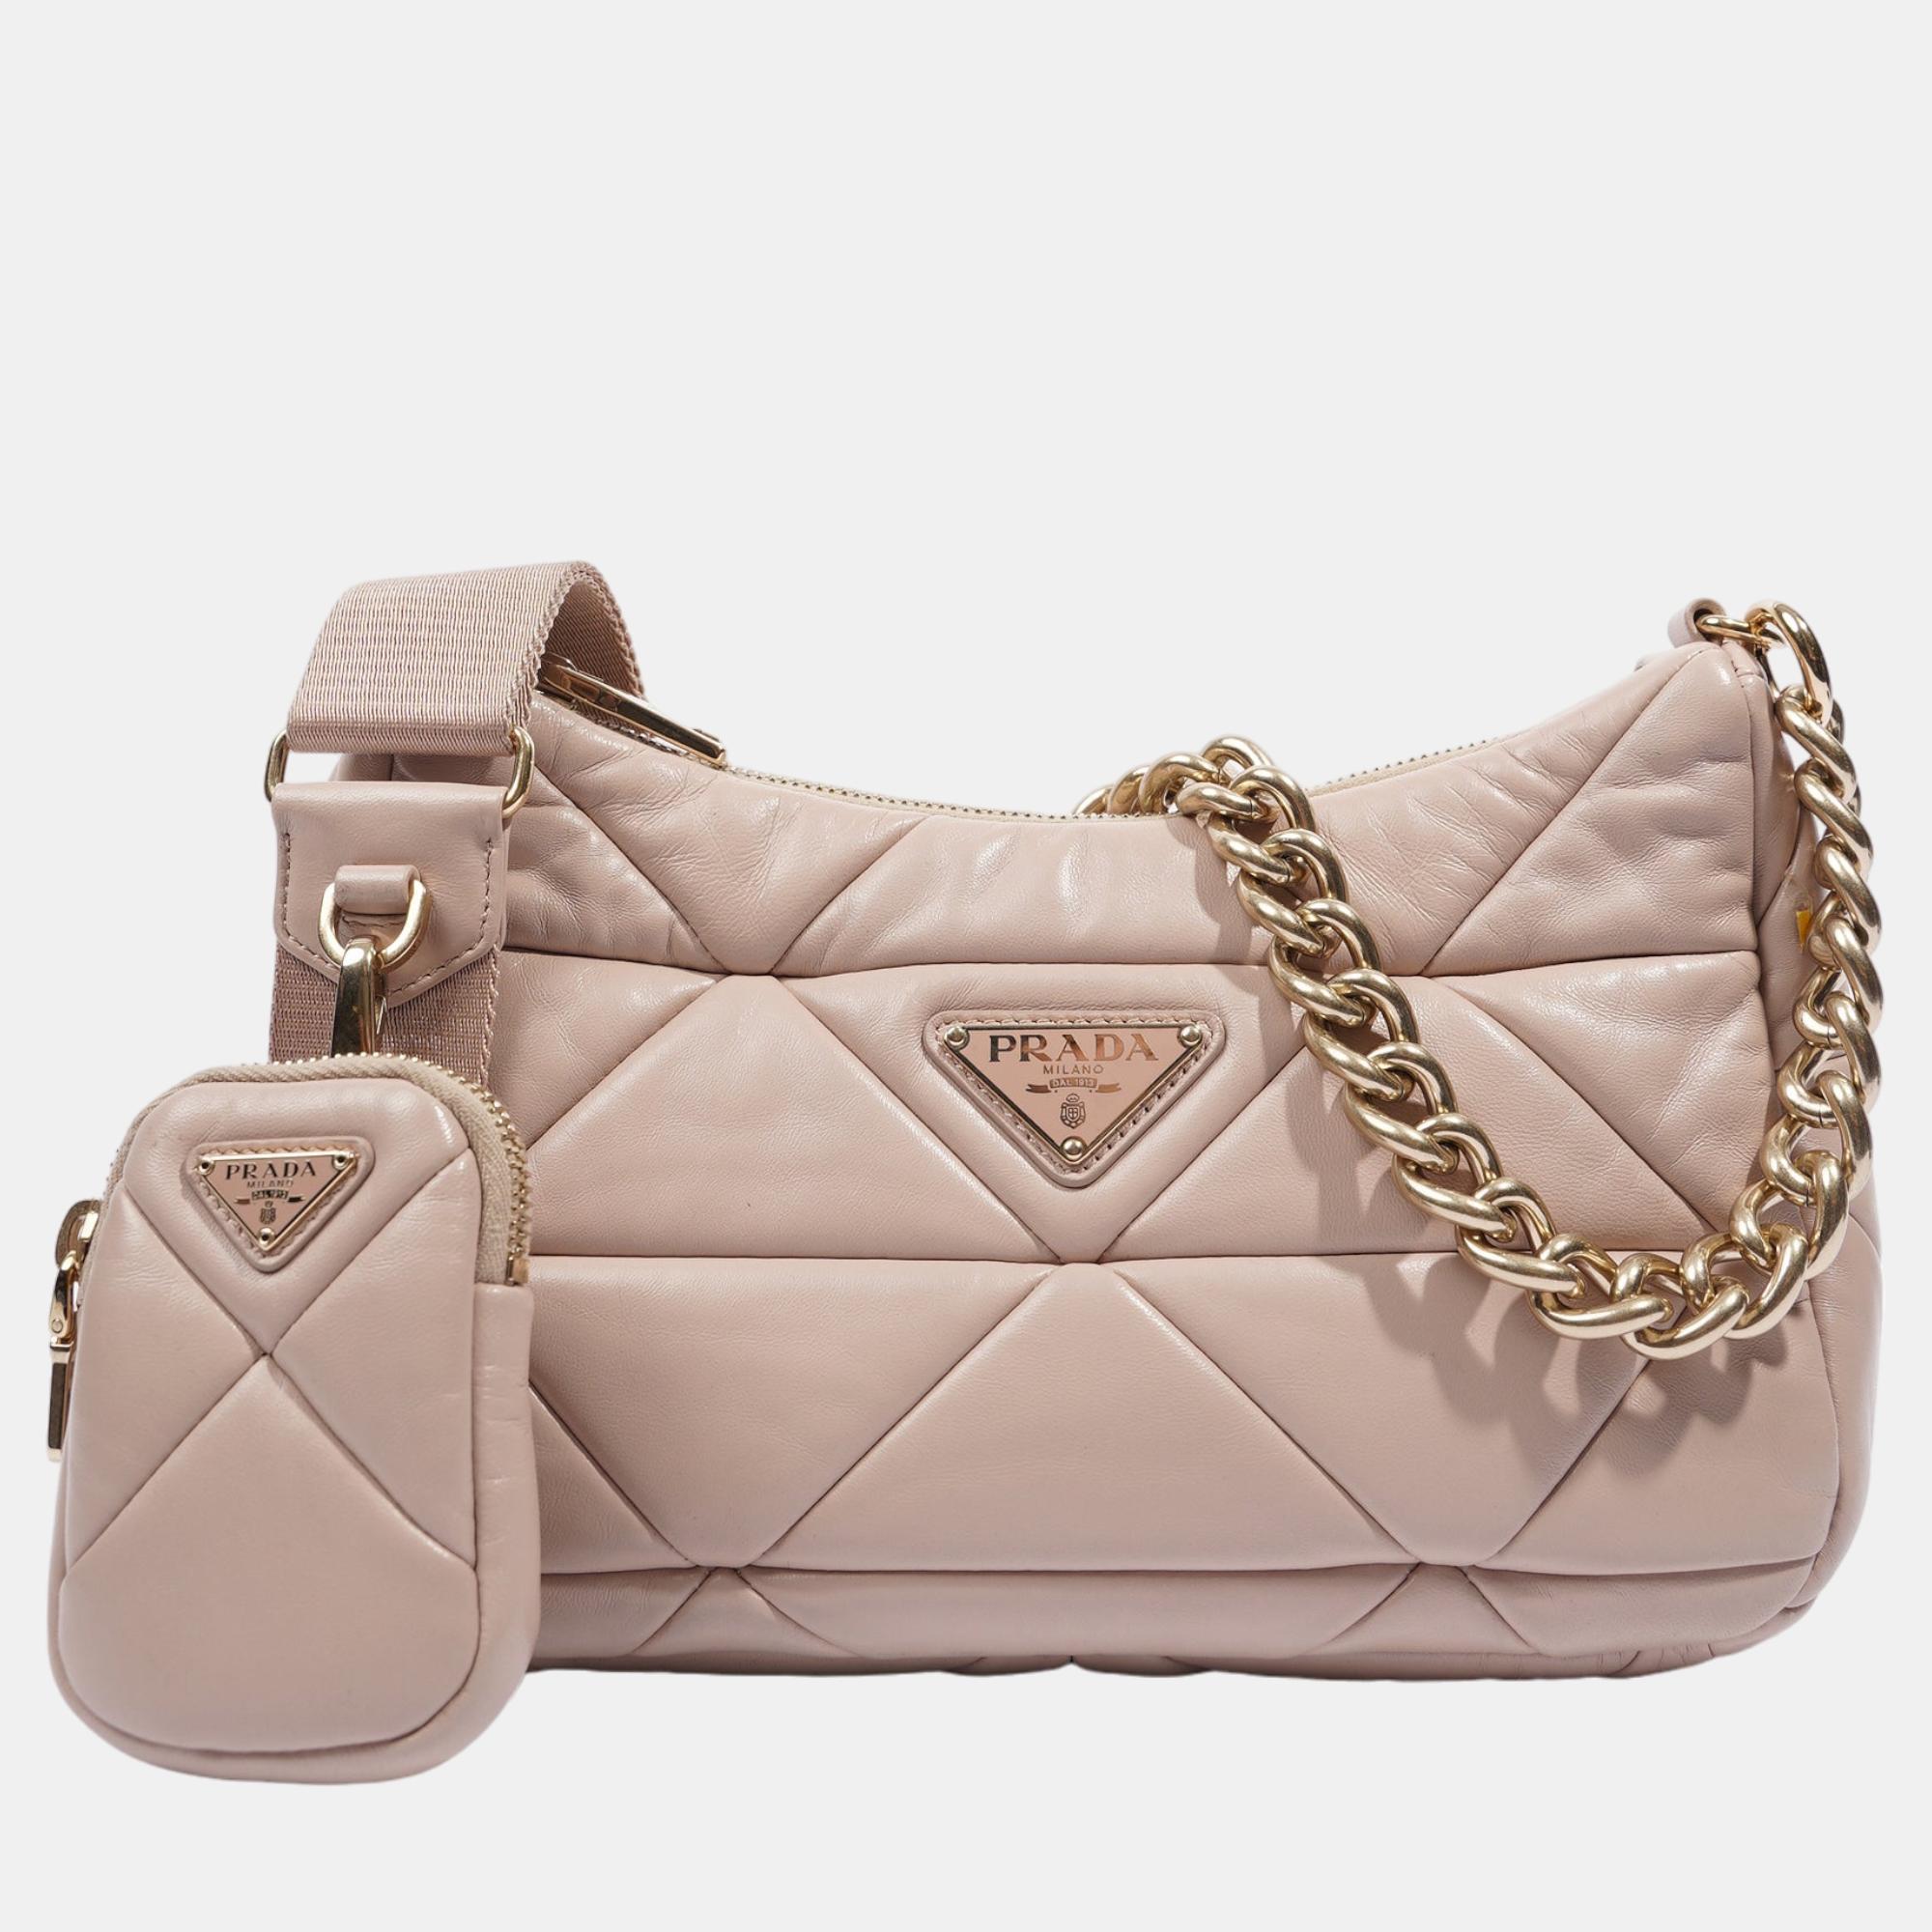 Prada Womens System Patchwork Bag Nude Nappa Leather